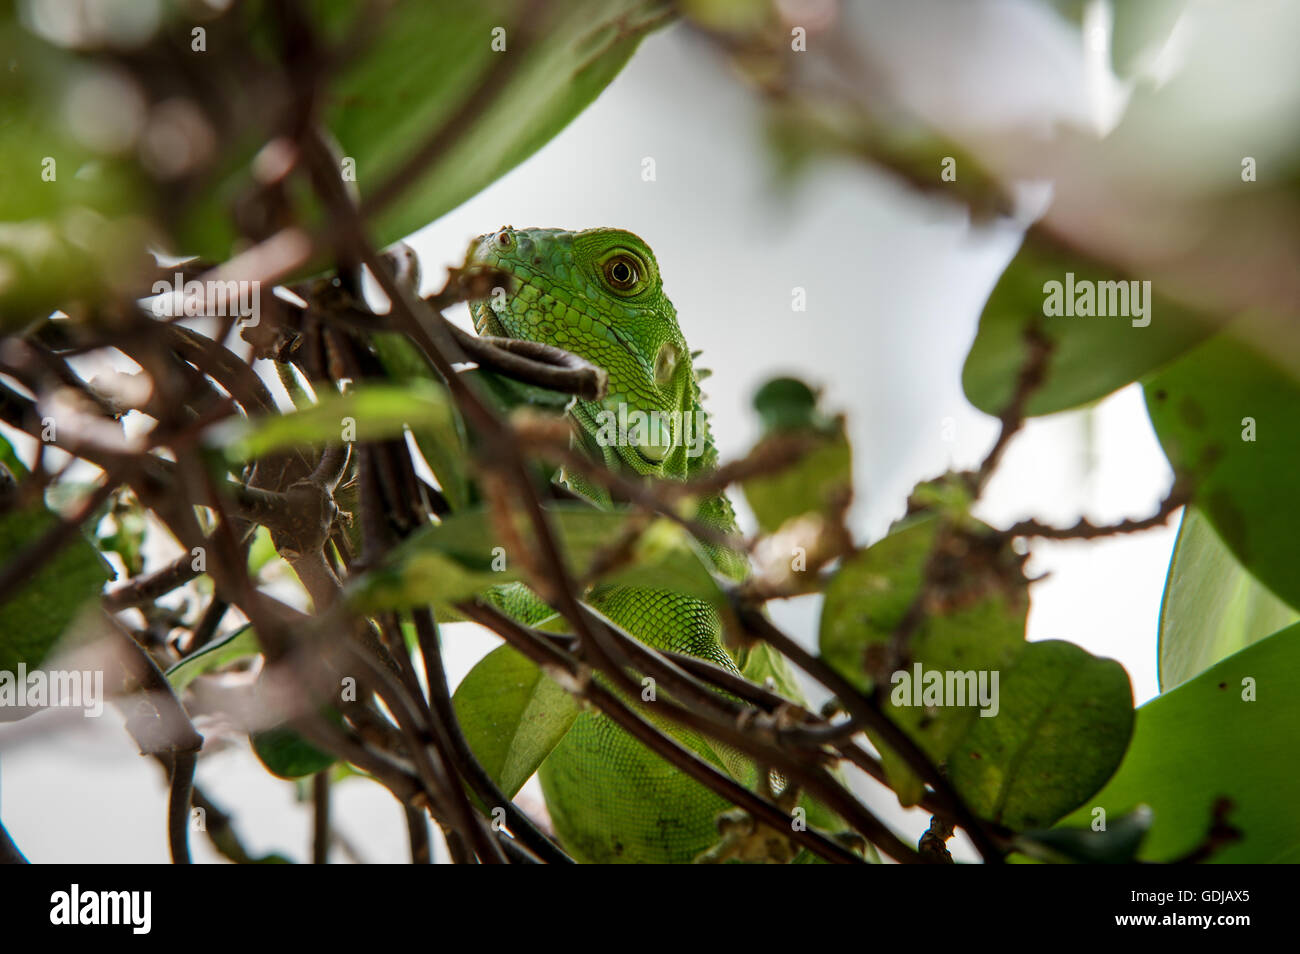 Green iguana camouflaged in a green hedge in South Beach, Miami, Florida Stock Photo